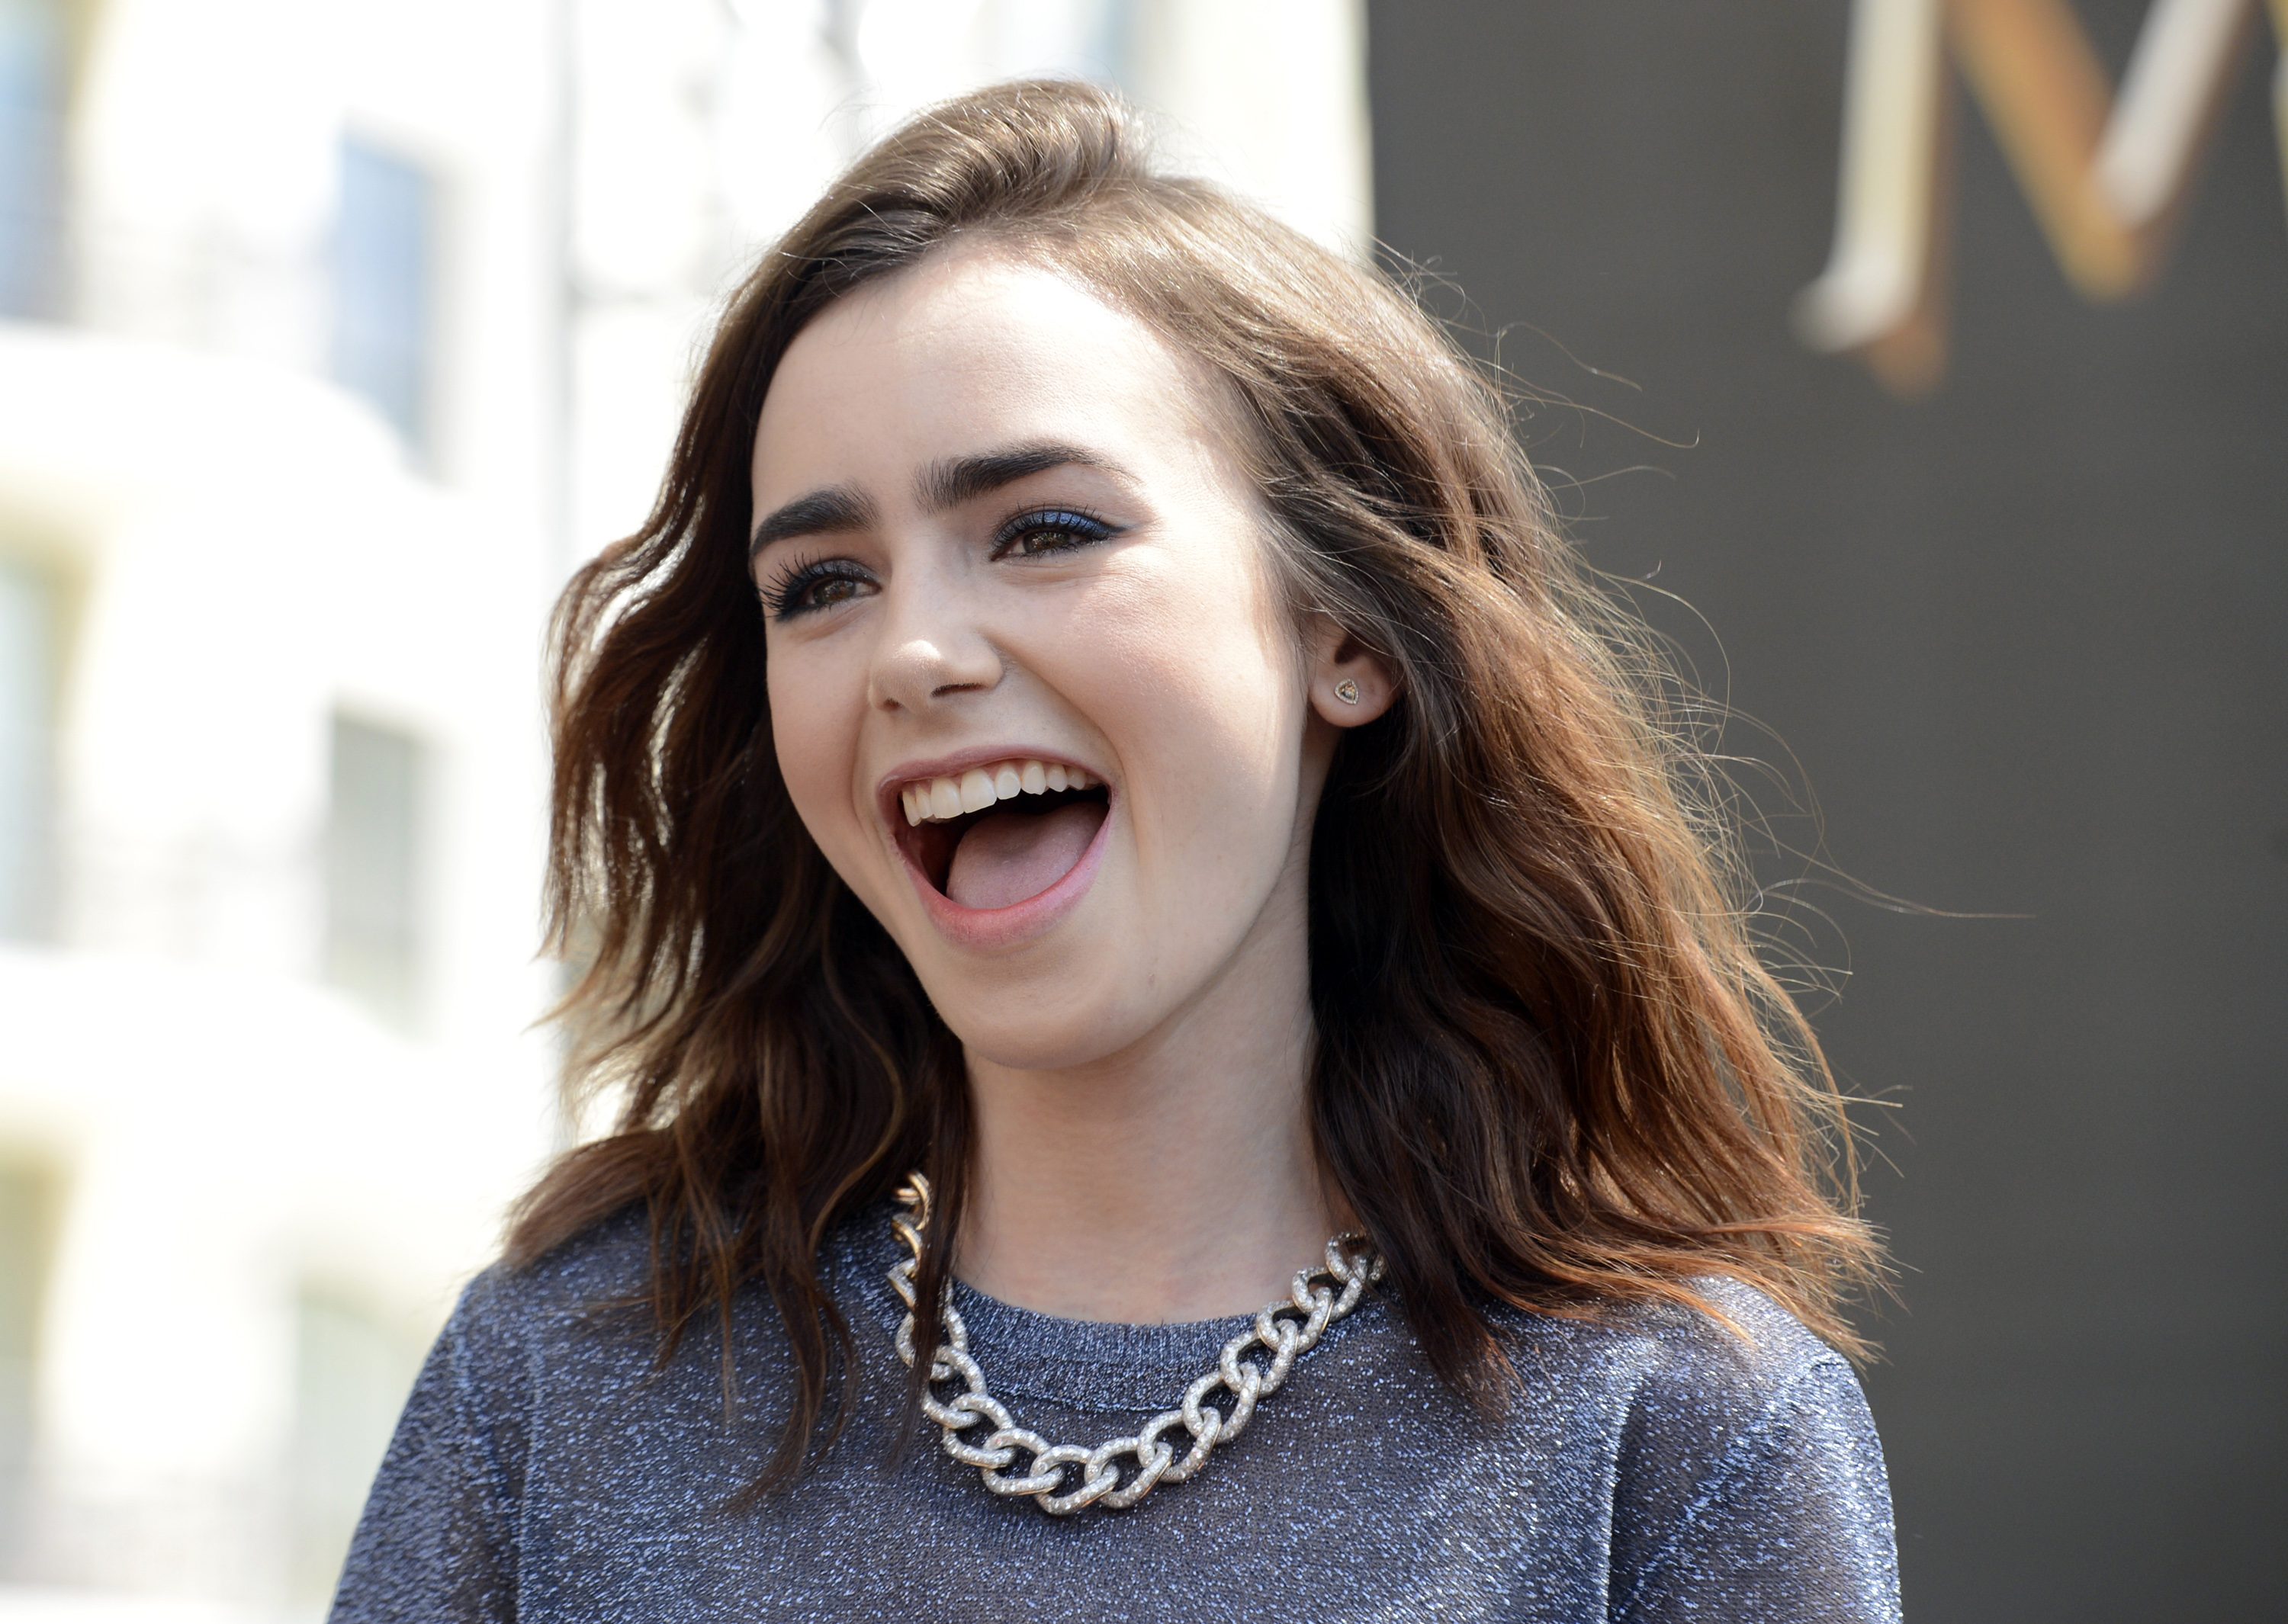 Lily Collins 2020 Actress Wallpapers